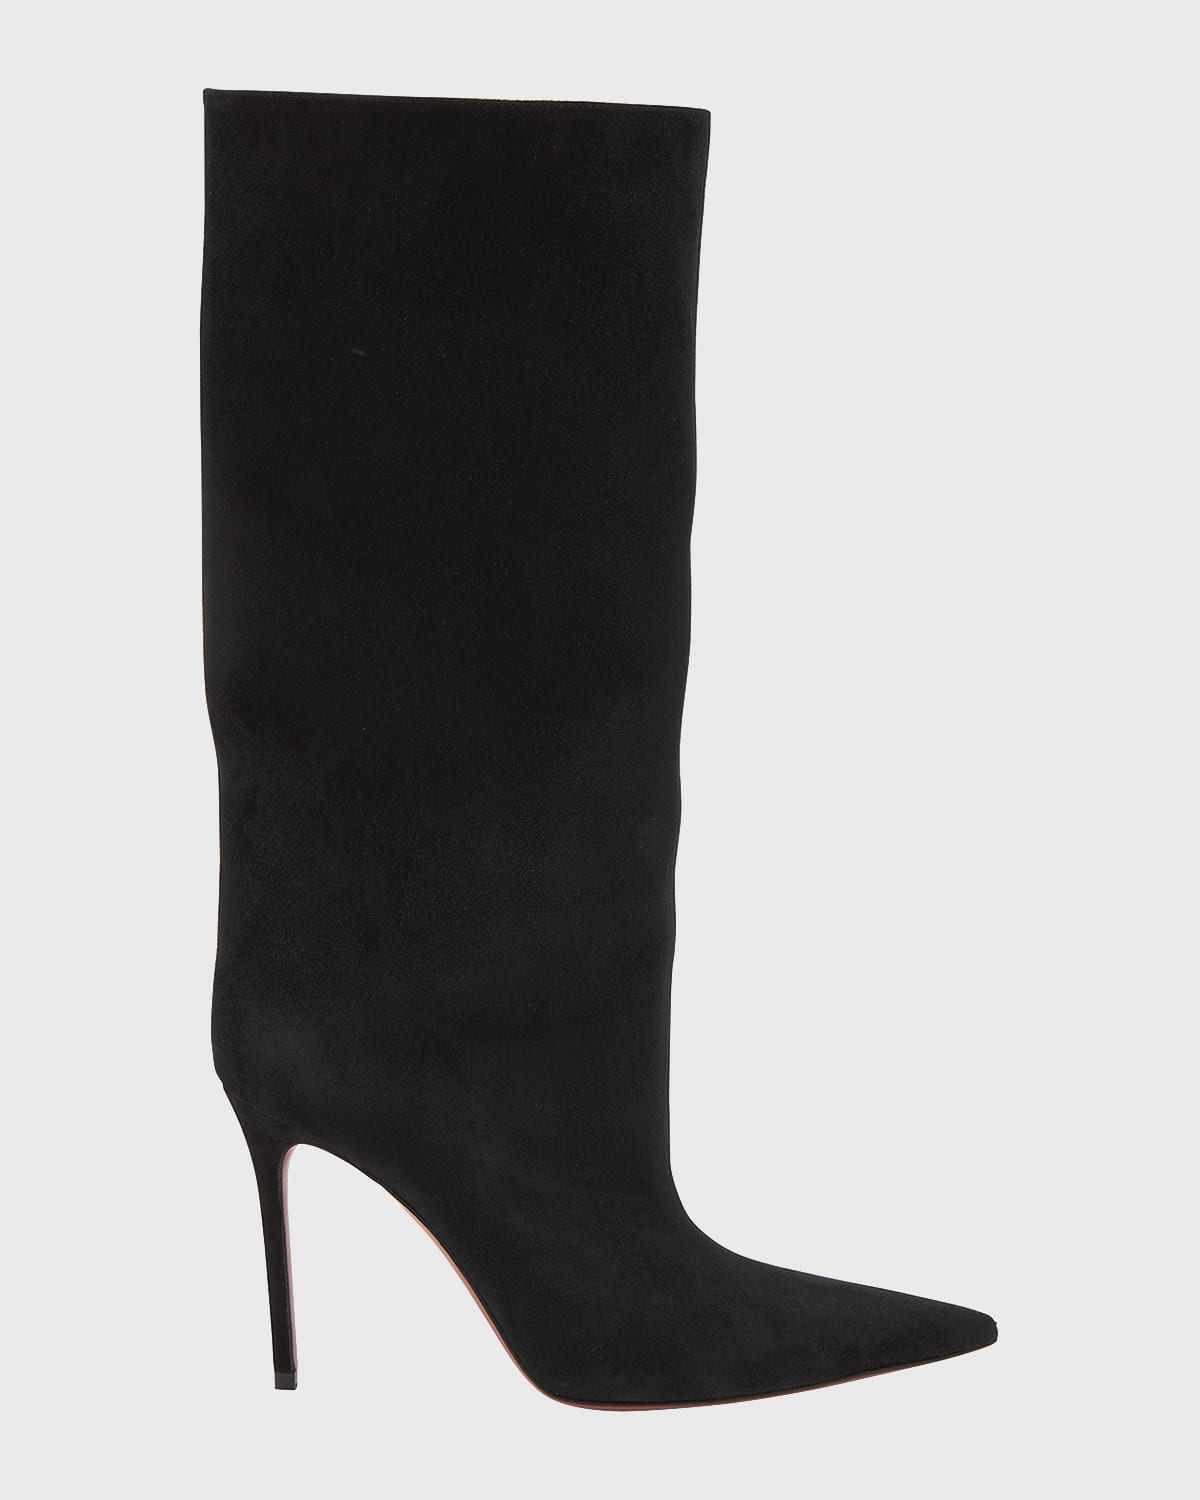 Fiona Suede Stiletto Slouchy Boots